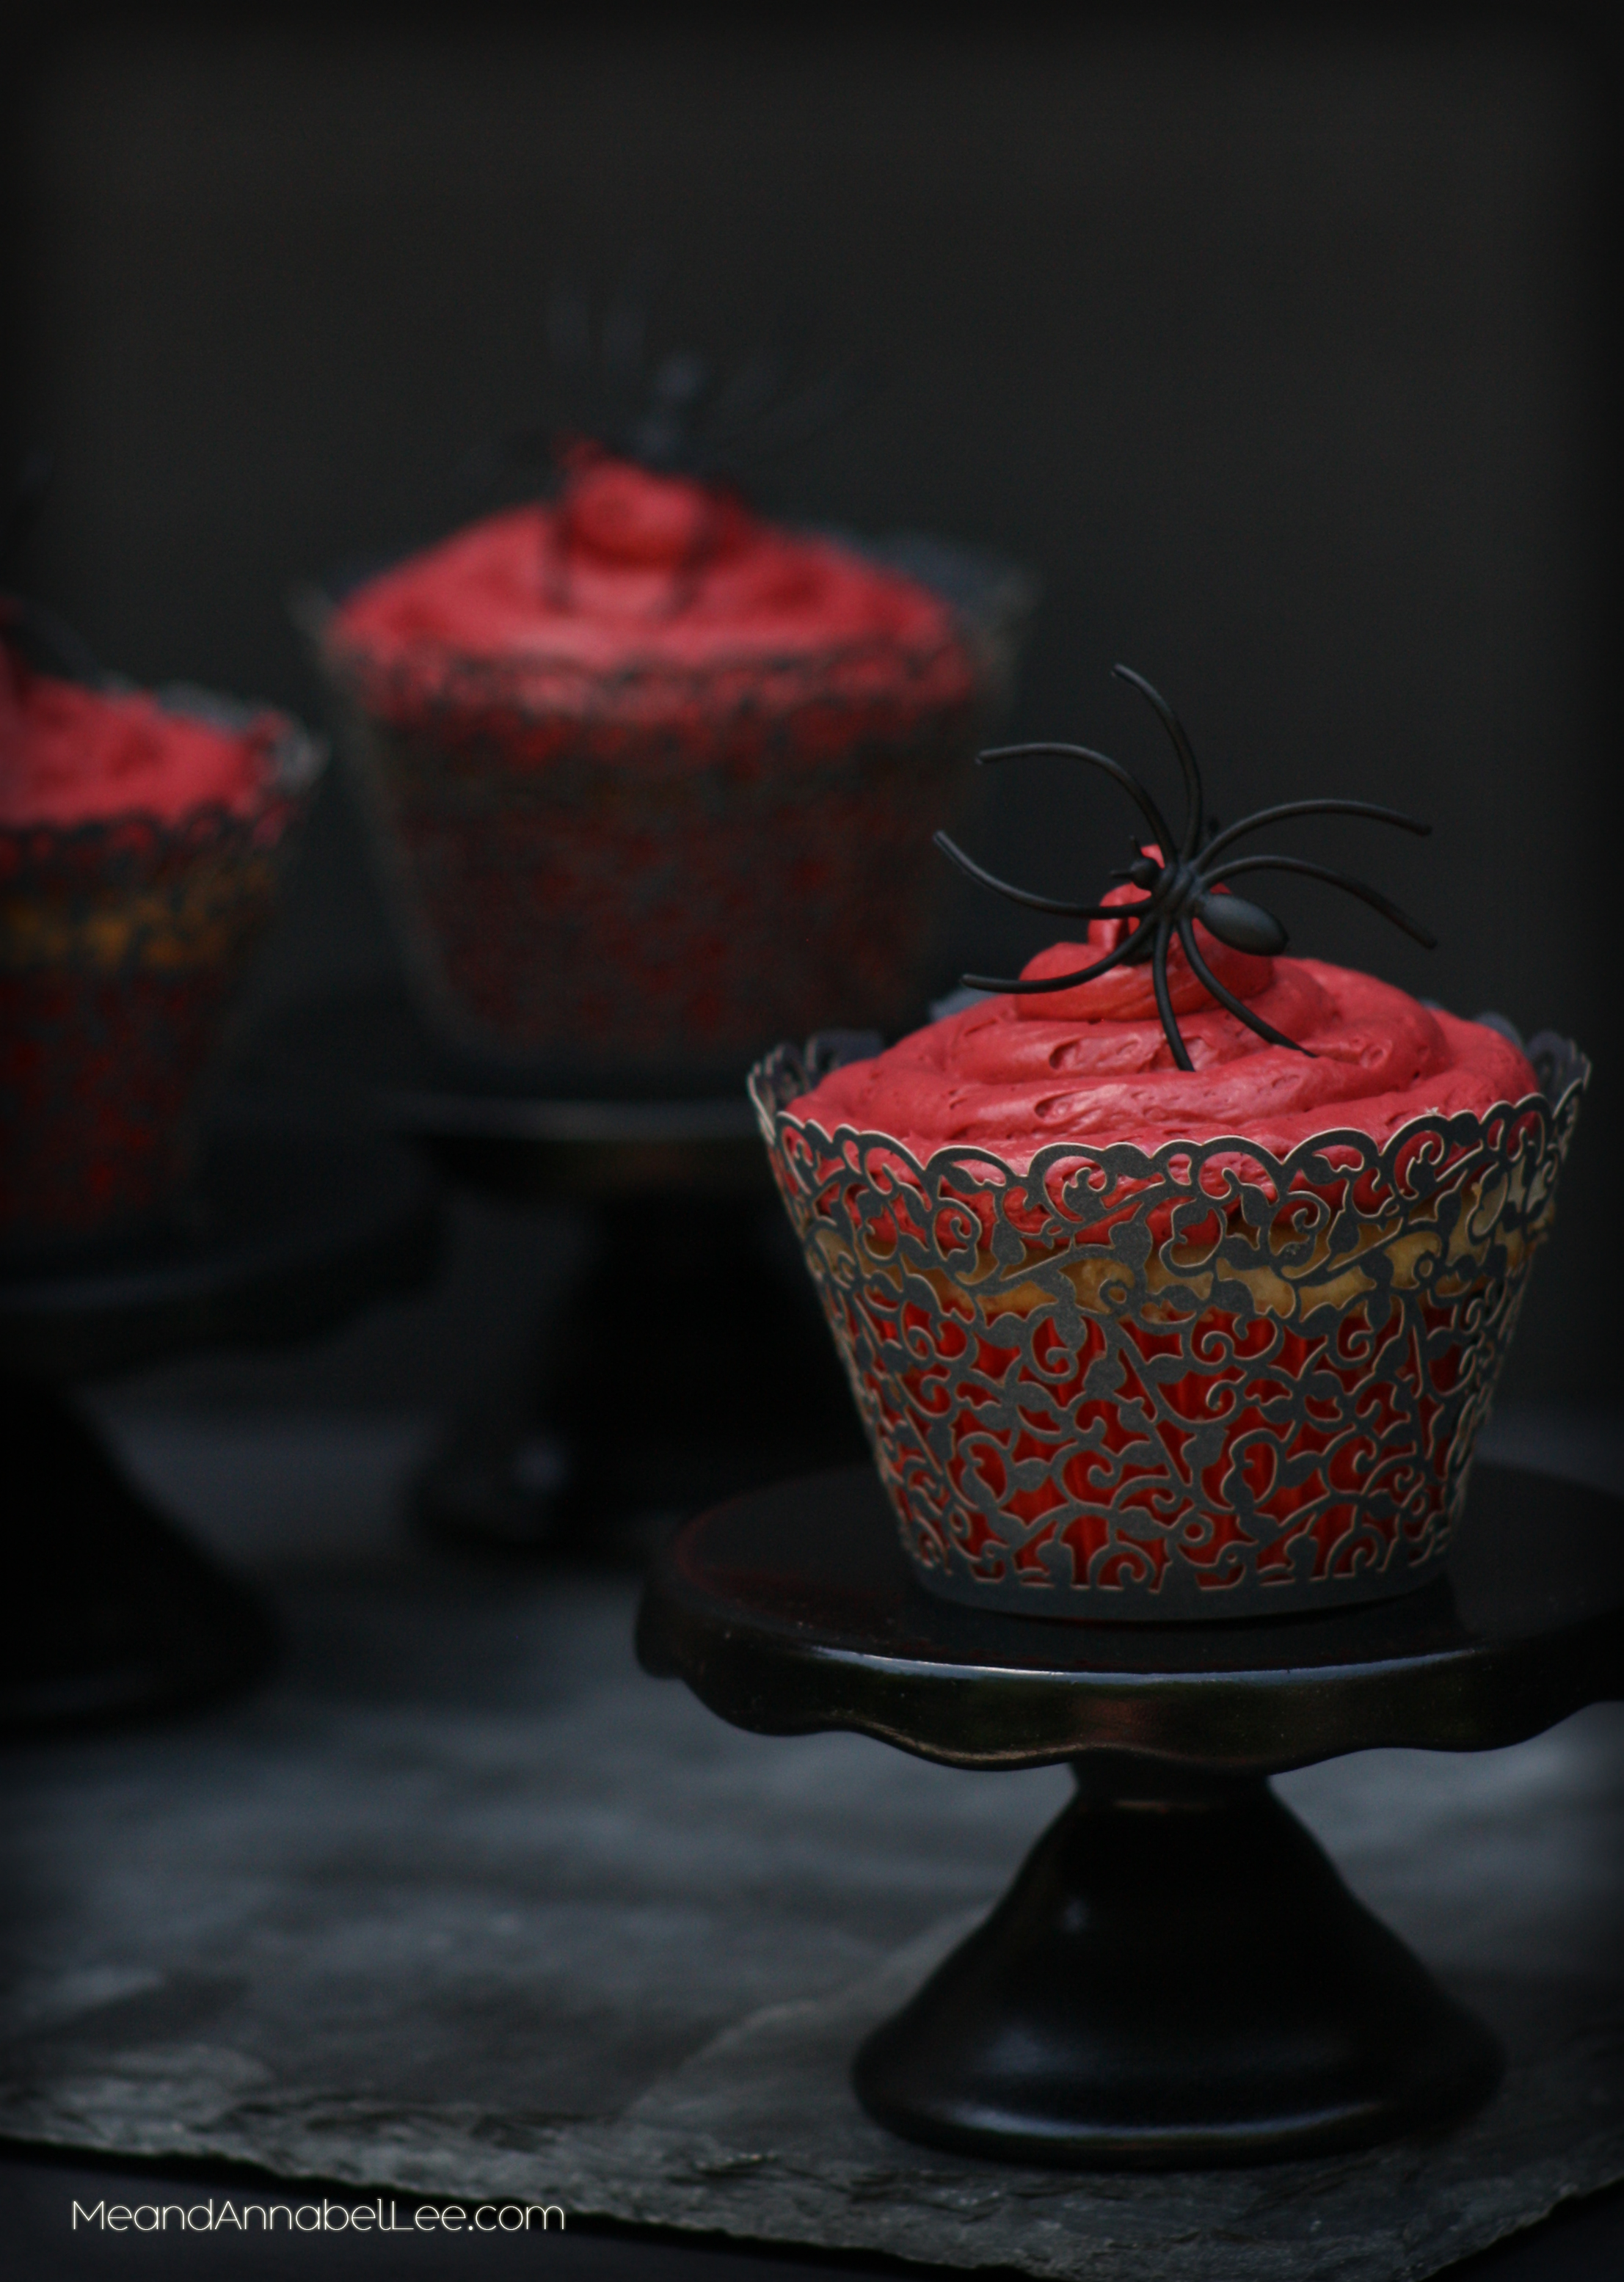 DIY Black Widow Cupcake Stands - Baking like a Badass - Black Red Gothic Cupcakes - Vampire Style - Gothic Baking - Goth It yourself - www.MeandAnnabelLee.com